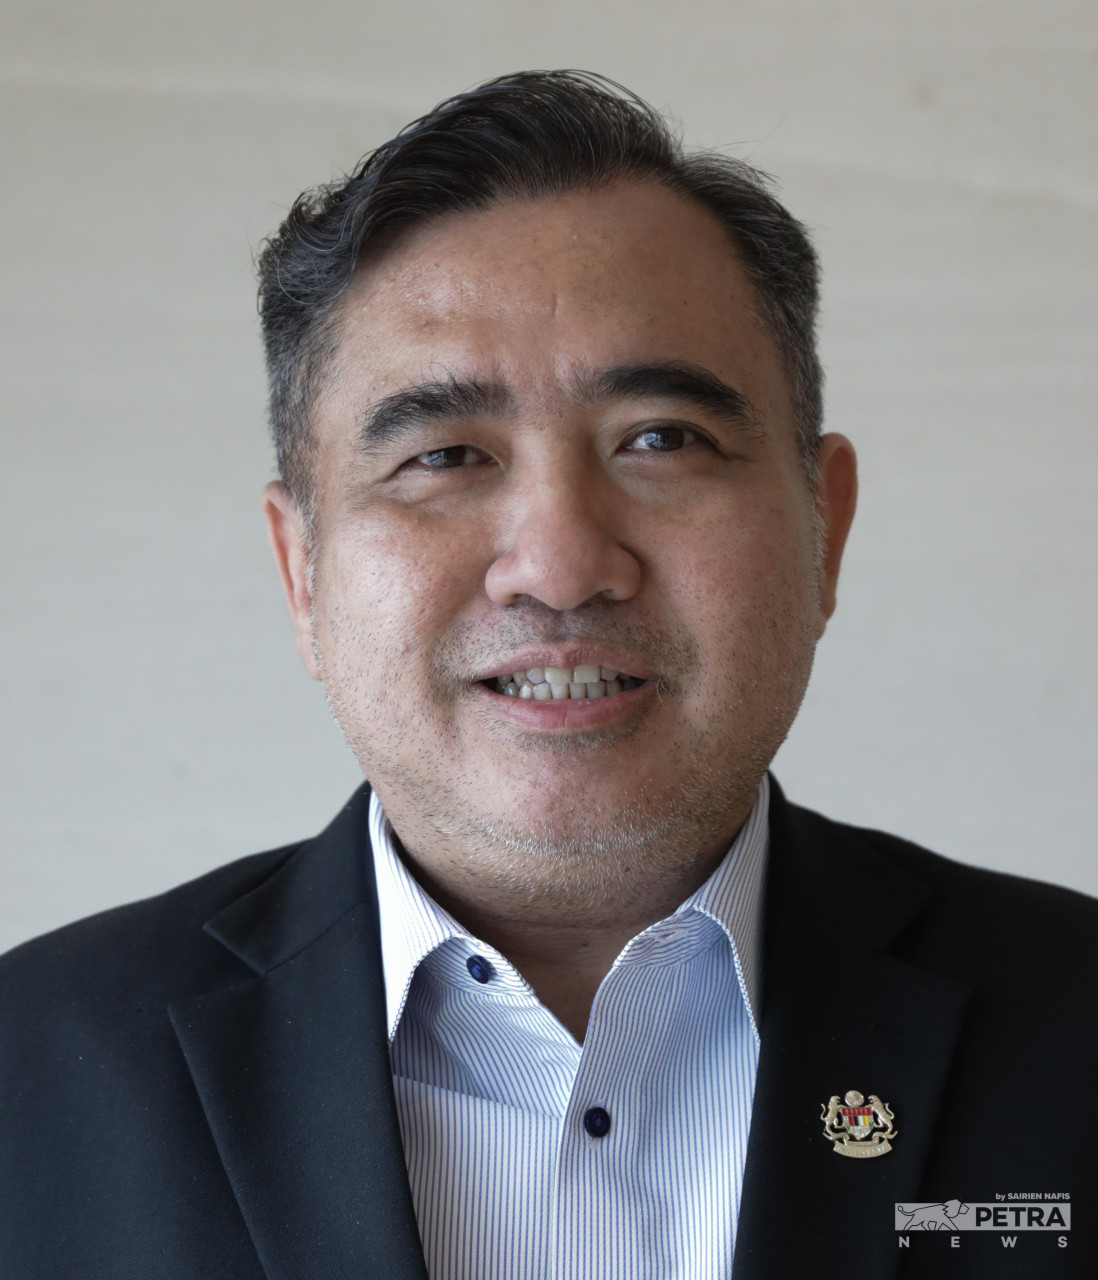 Seremban MP Anthony Loke Siew Fook says it is unlikely for the government to dissolve Parliament before the tabling of the national budget at the end of October, as it would have no political advantage. – SAIRIEN NAFIS/The Vibes pic, July 17, 2022 